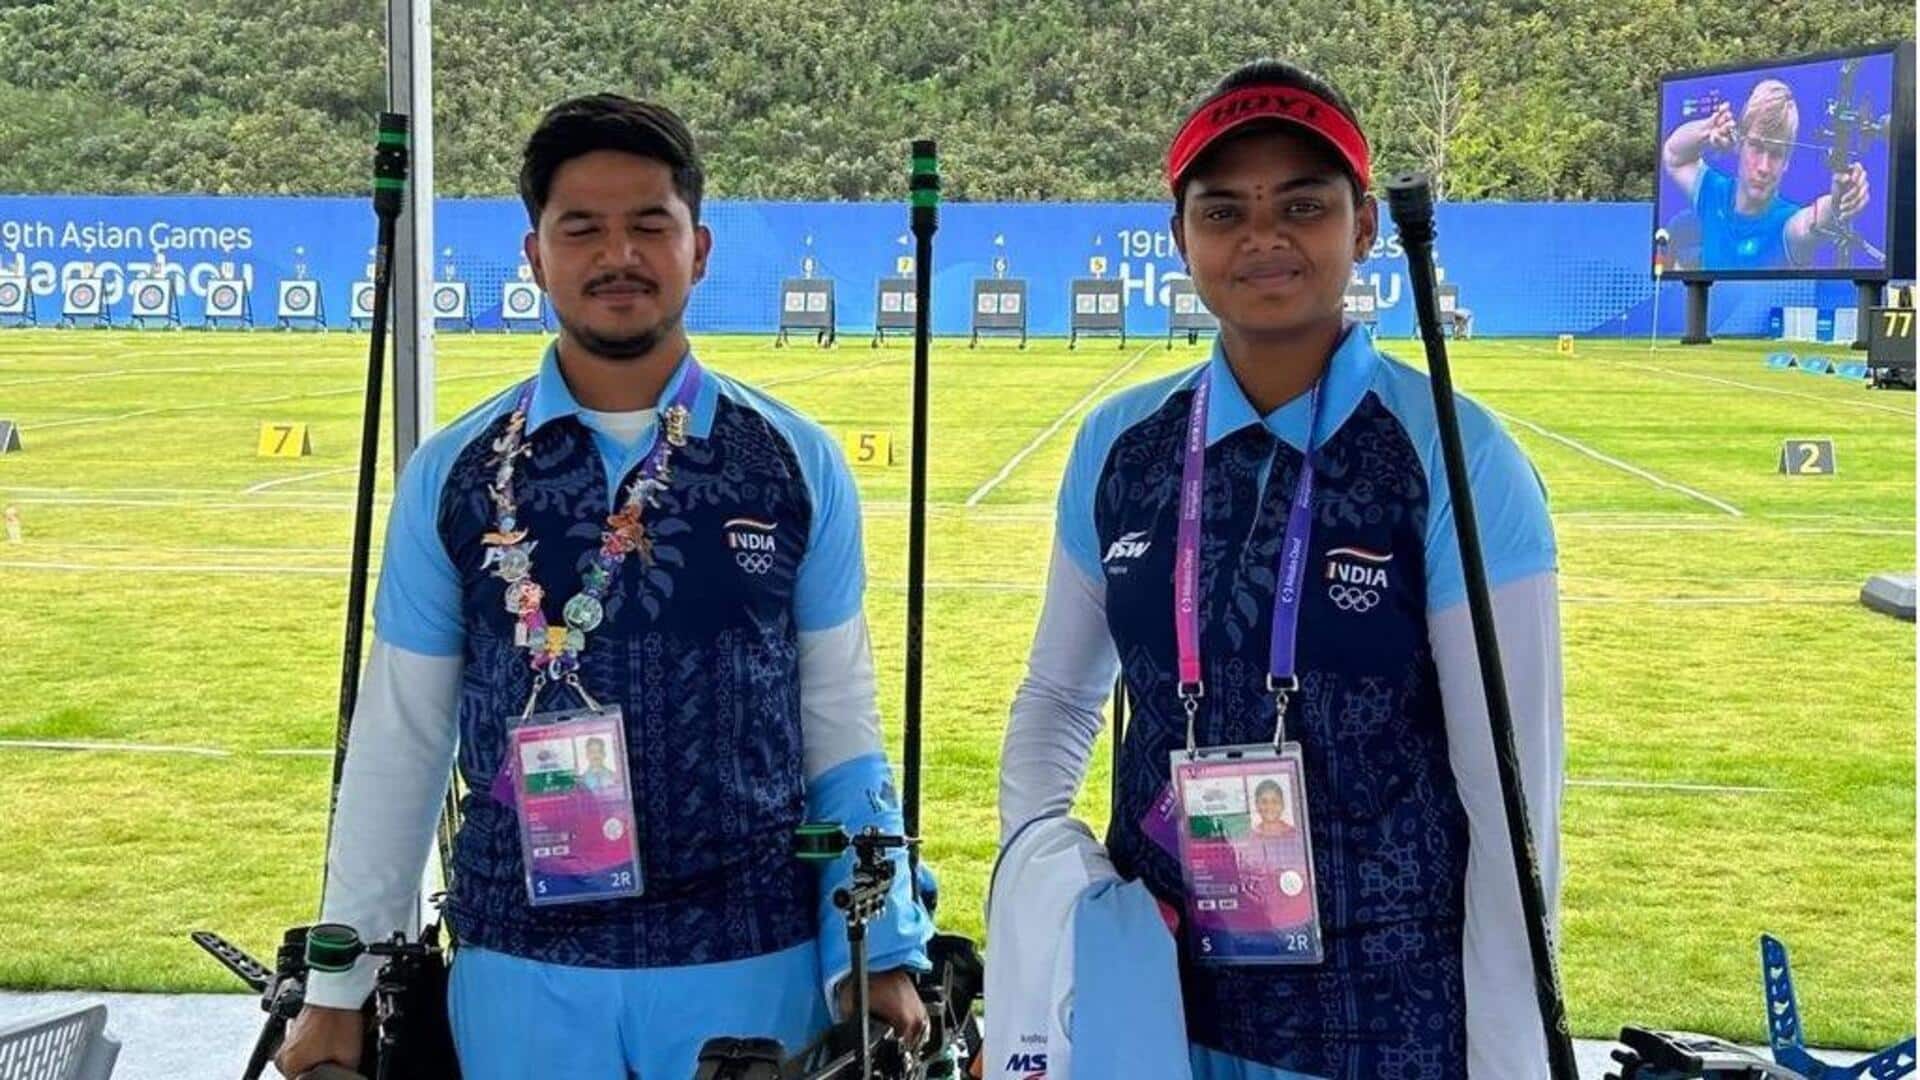 India register their best medal haul at Asian Games: Details